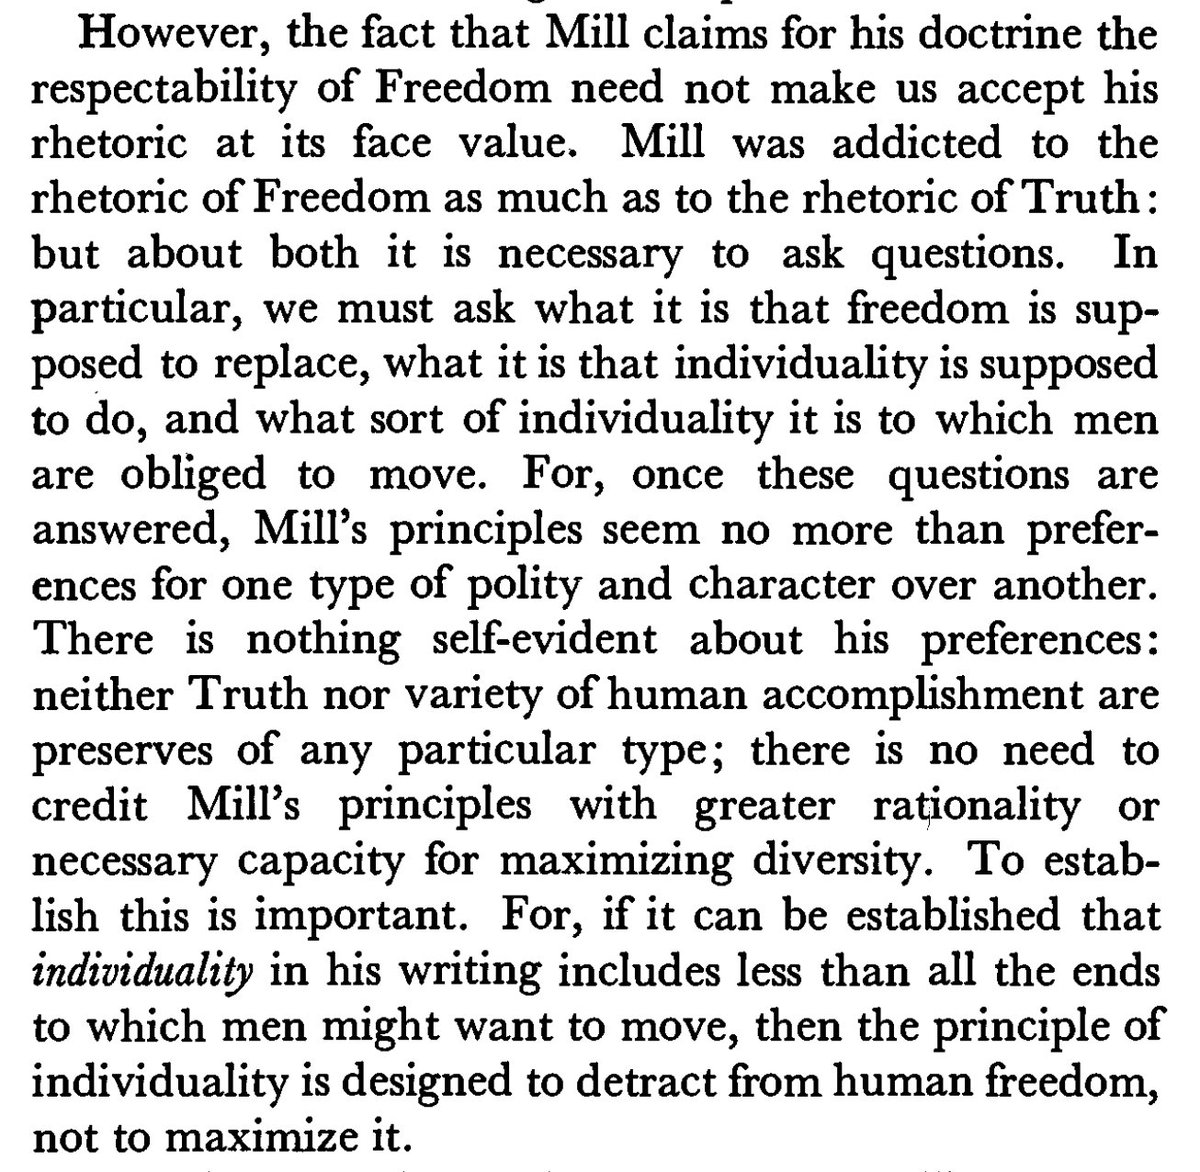 Again, a simple bit of advice, which human beings seem remarkable deficient in. Do not take everything people say at face value, especially not great philosophers. Mill wrote a treatise On Liberty, tell us he was pro-liberty. But Marx said the same thing.